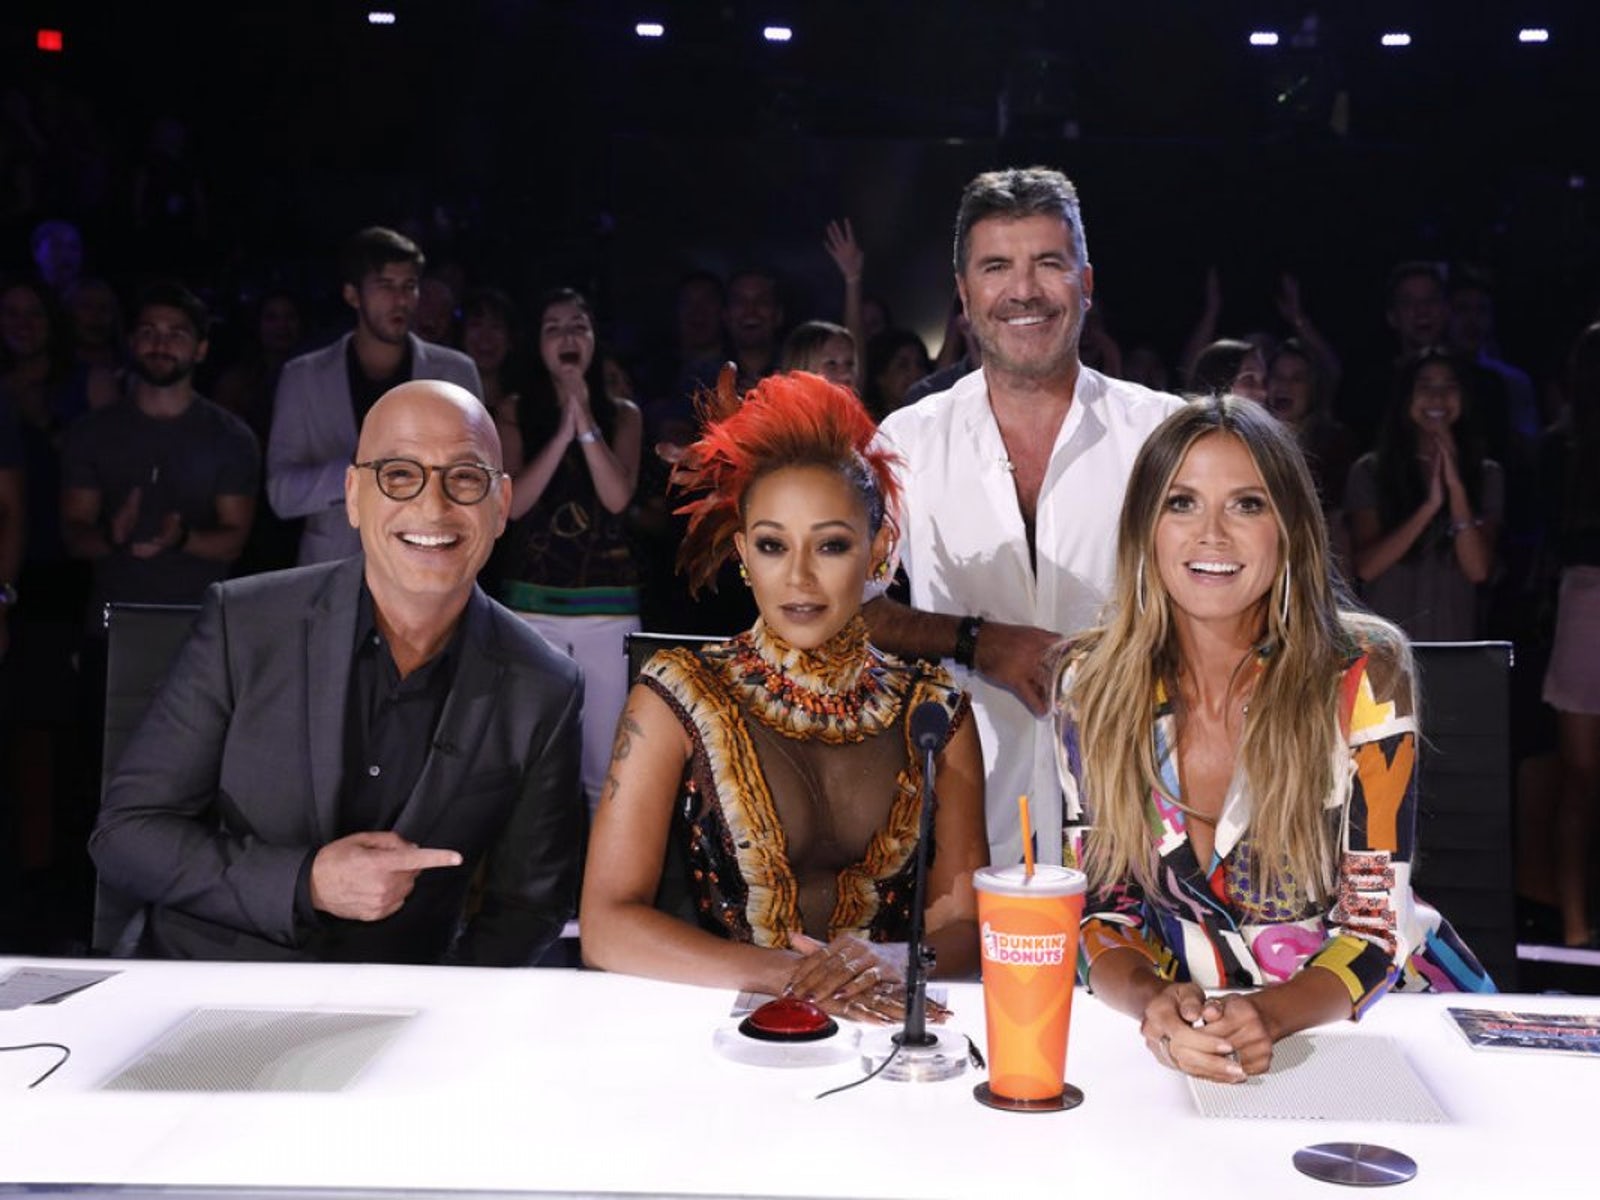 kronblad Inde magi America's Got Talent: The Champions' champions acts announced by NBC